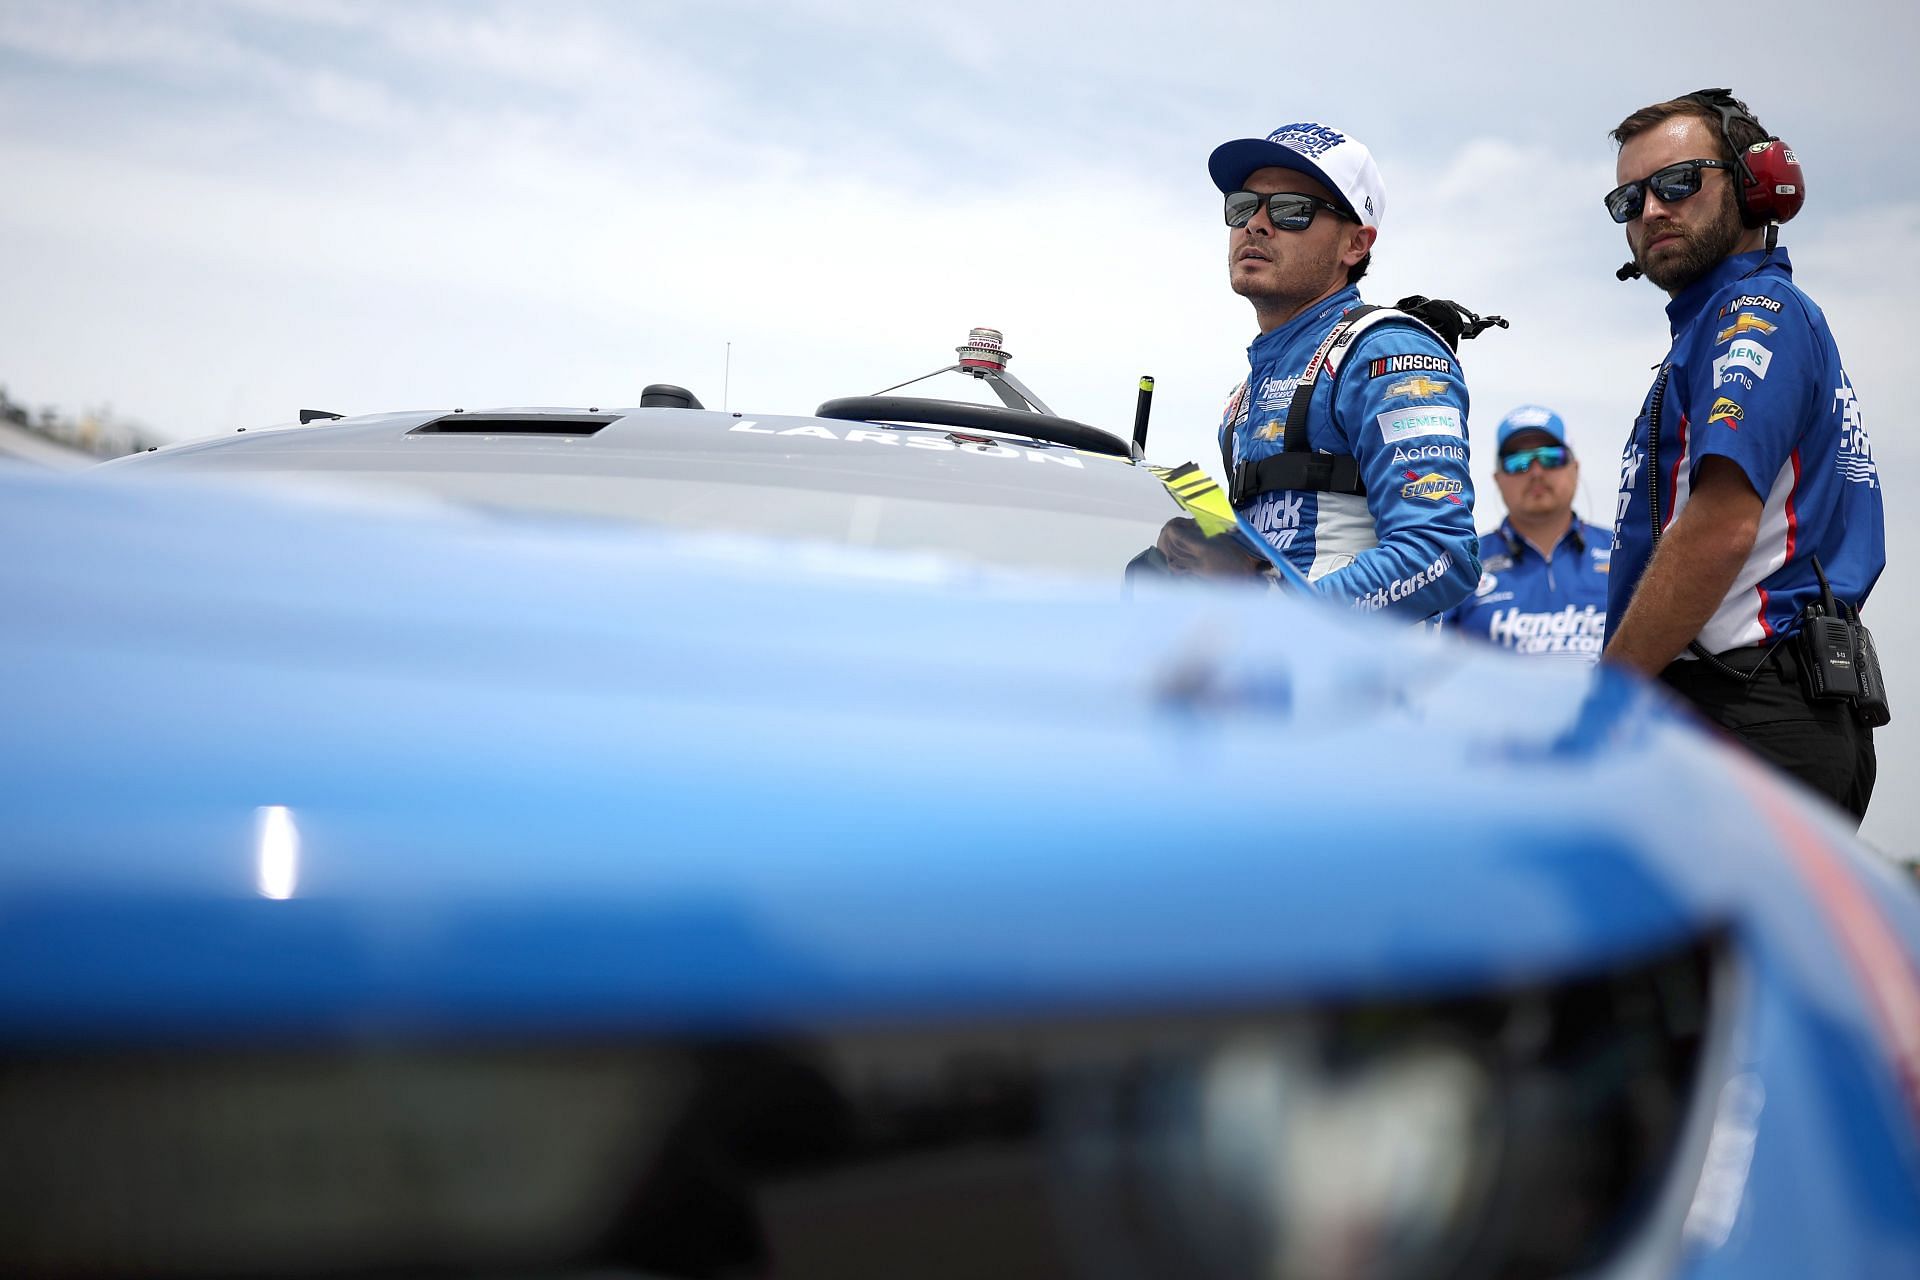 Kyle Larson enters his car during qualifying for the 2022 NASCAR Cup Series Ambetter 301 at New Hampshire Motor Speedway in Loudon, New Hampshire. (Photo by James Gilbert/Getty Images)